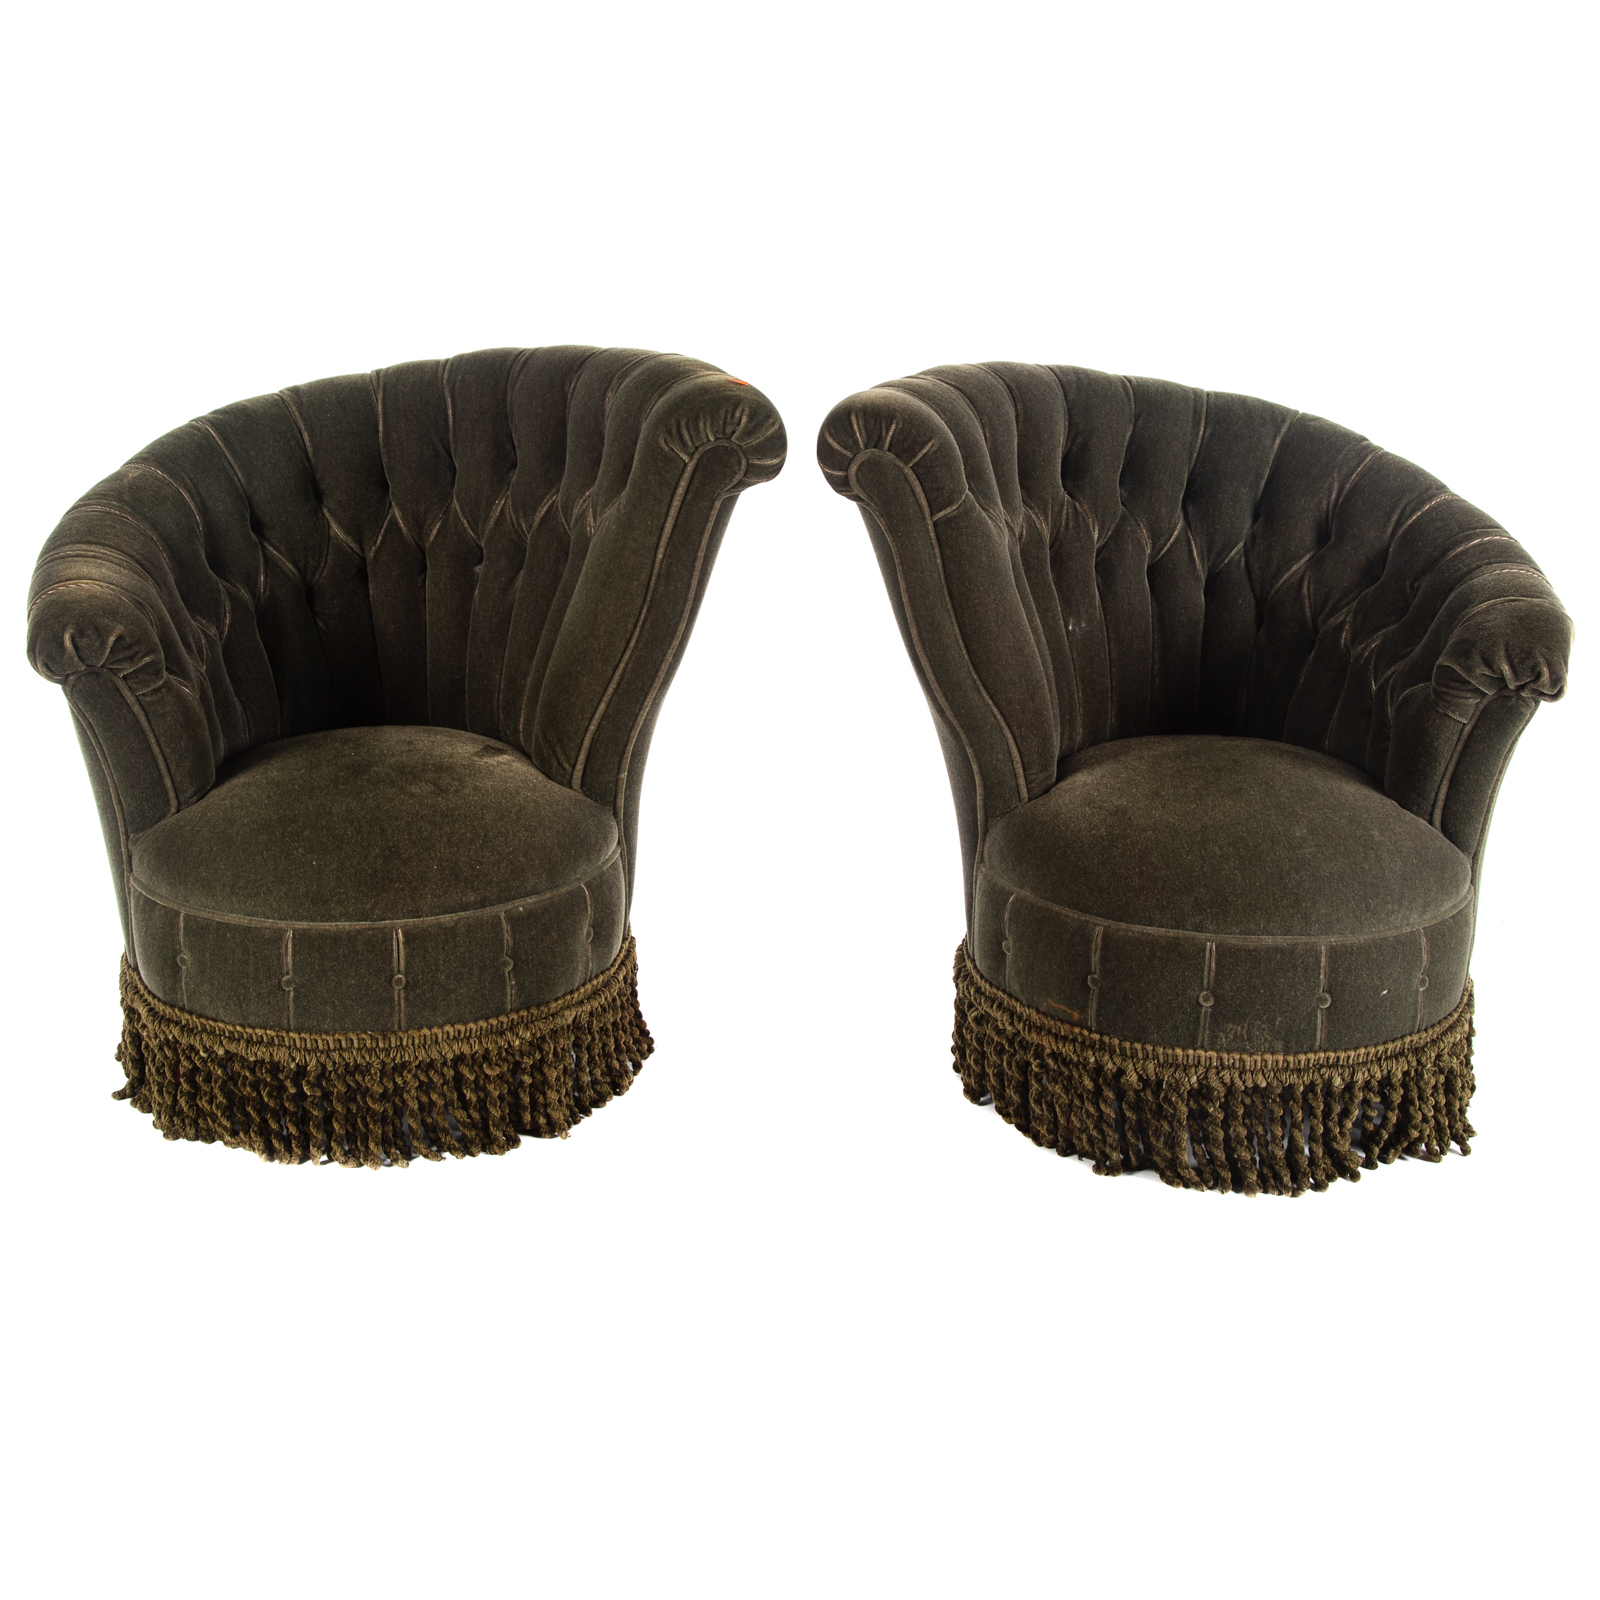 A PAIR OF TUFTED UPHOLSTERED CHAIRS 3b28cf